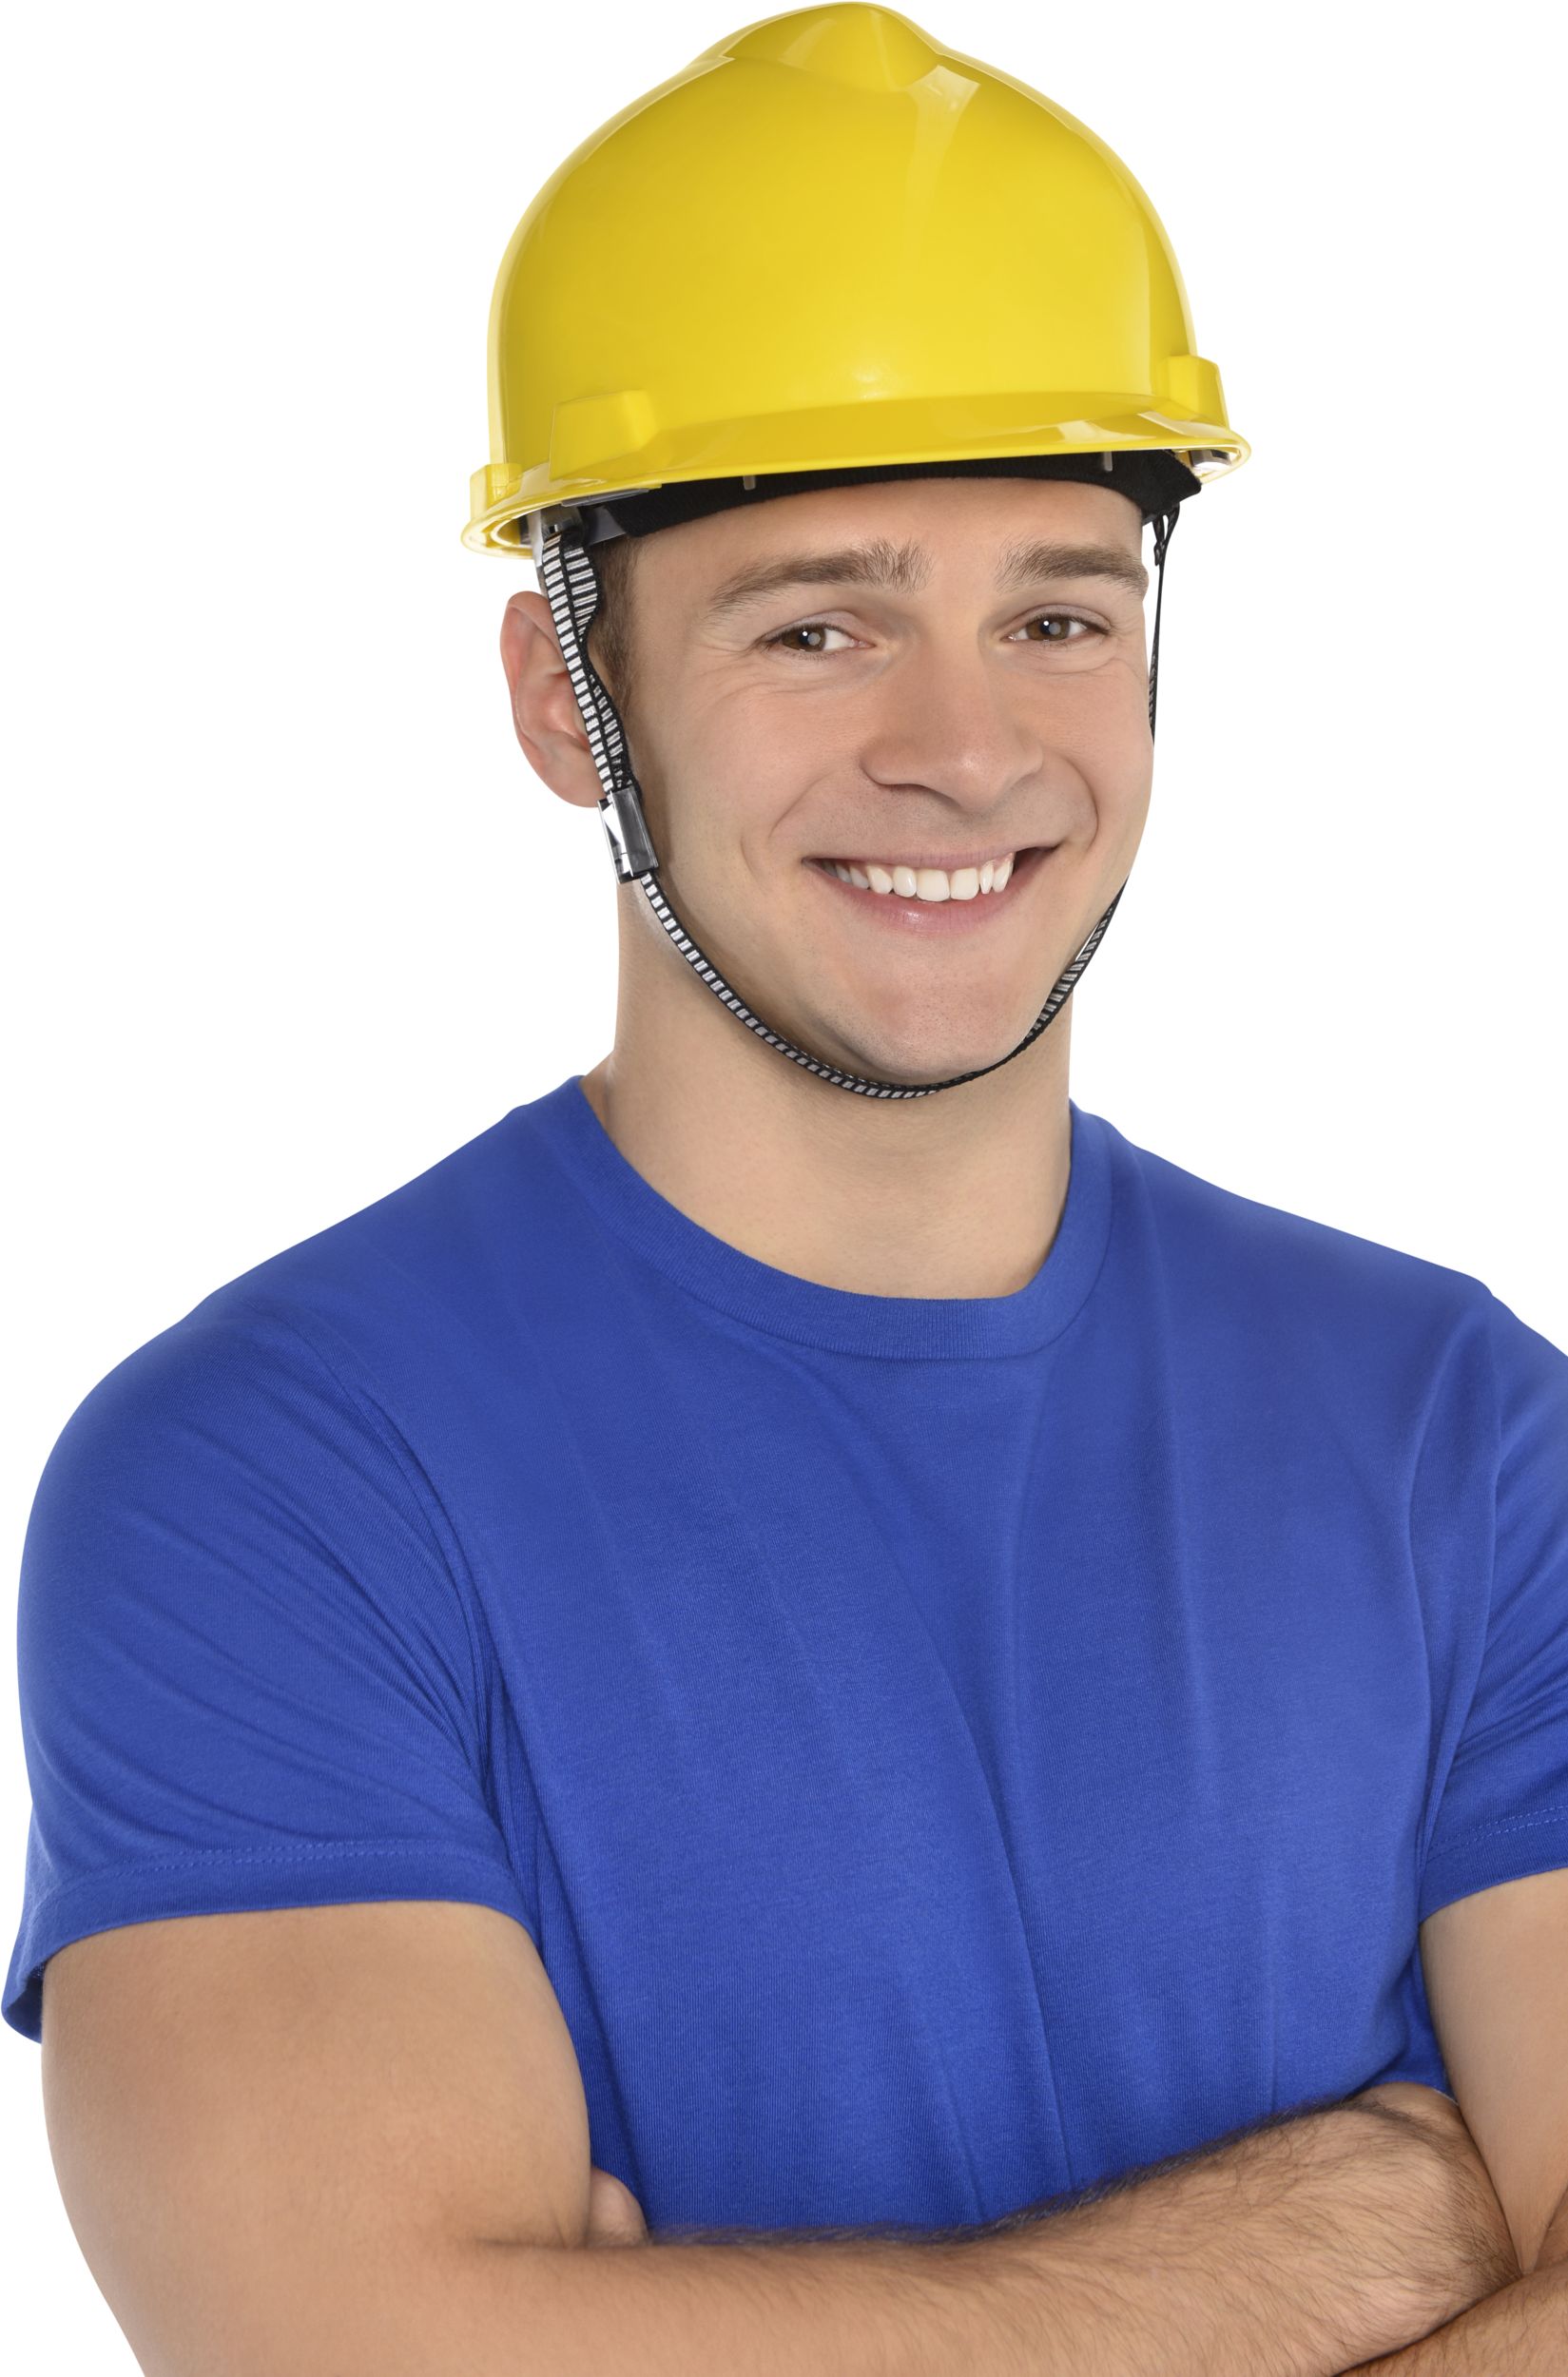 Construction Plastic Hard Hat, Yellow, One Size, Wearable Costume Accessory  for Halloween